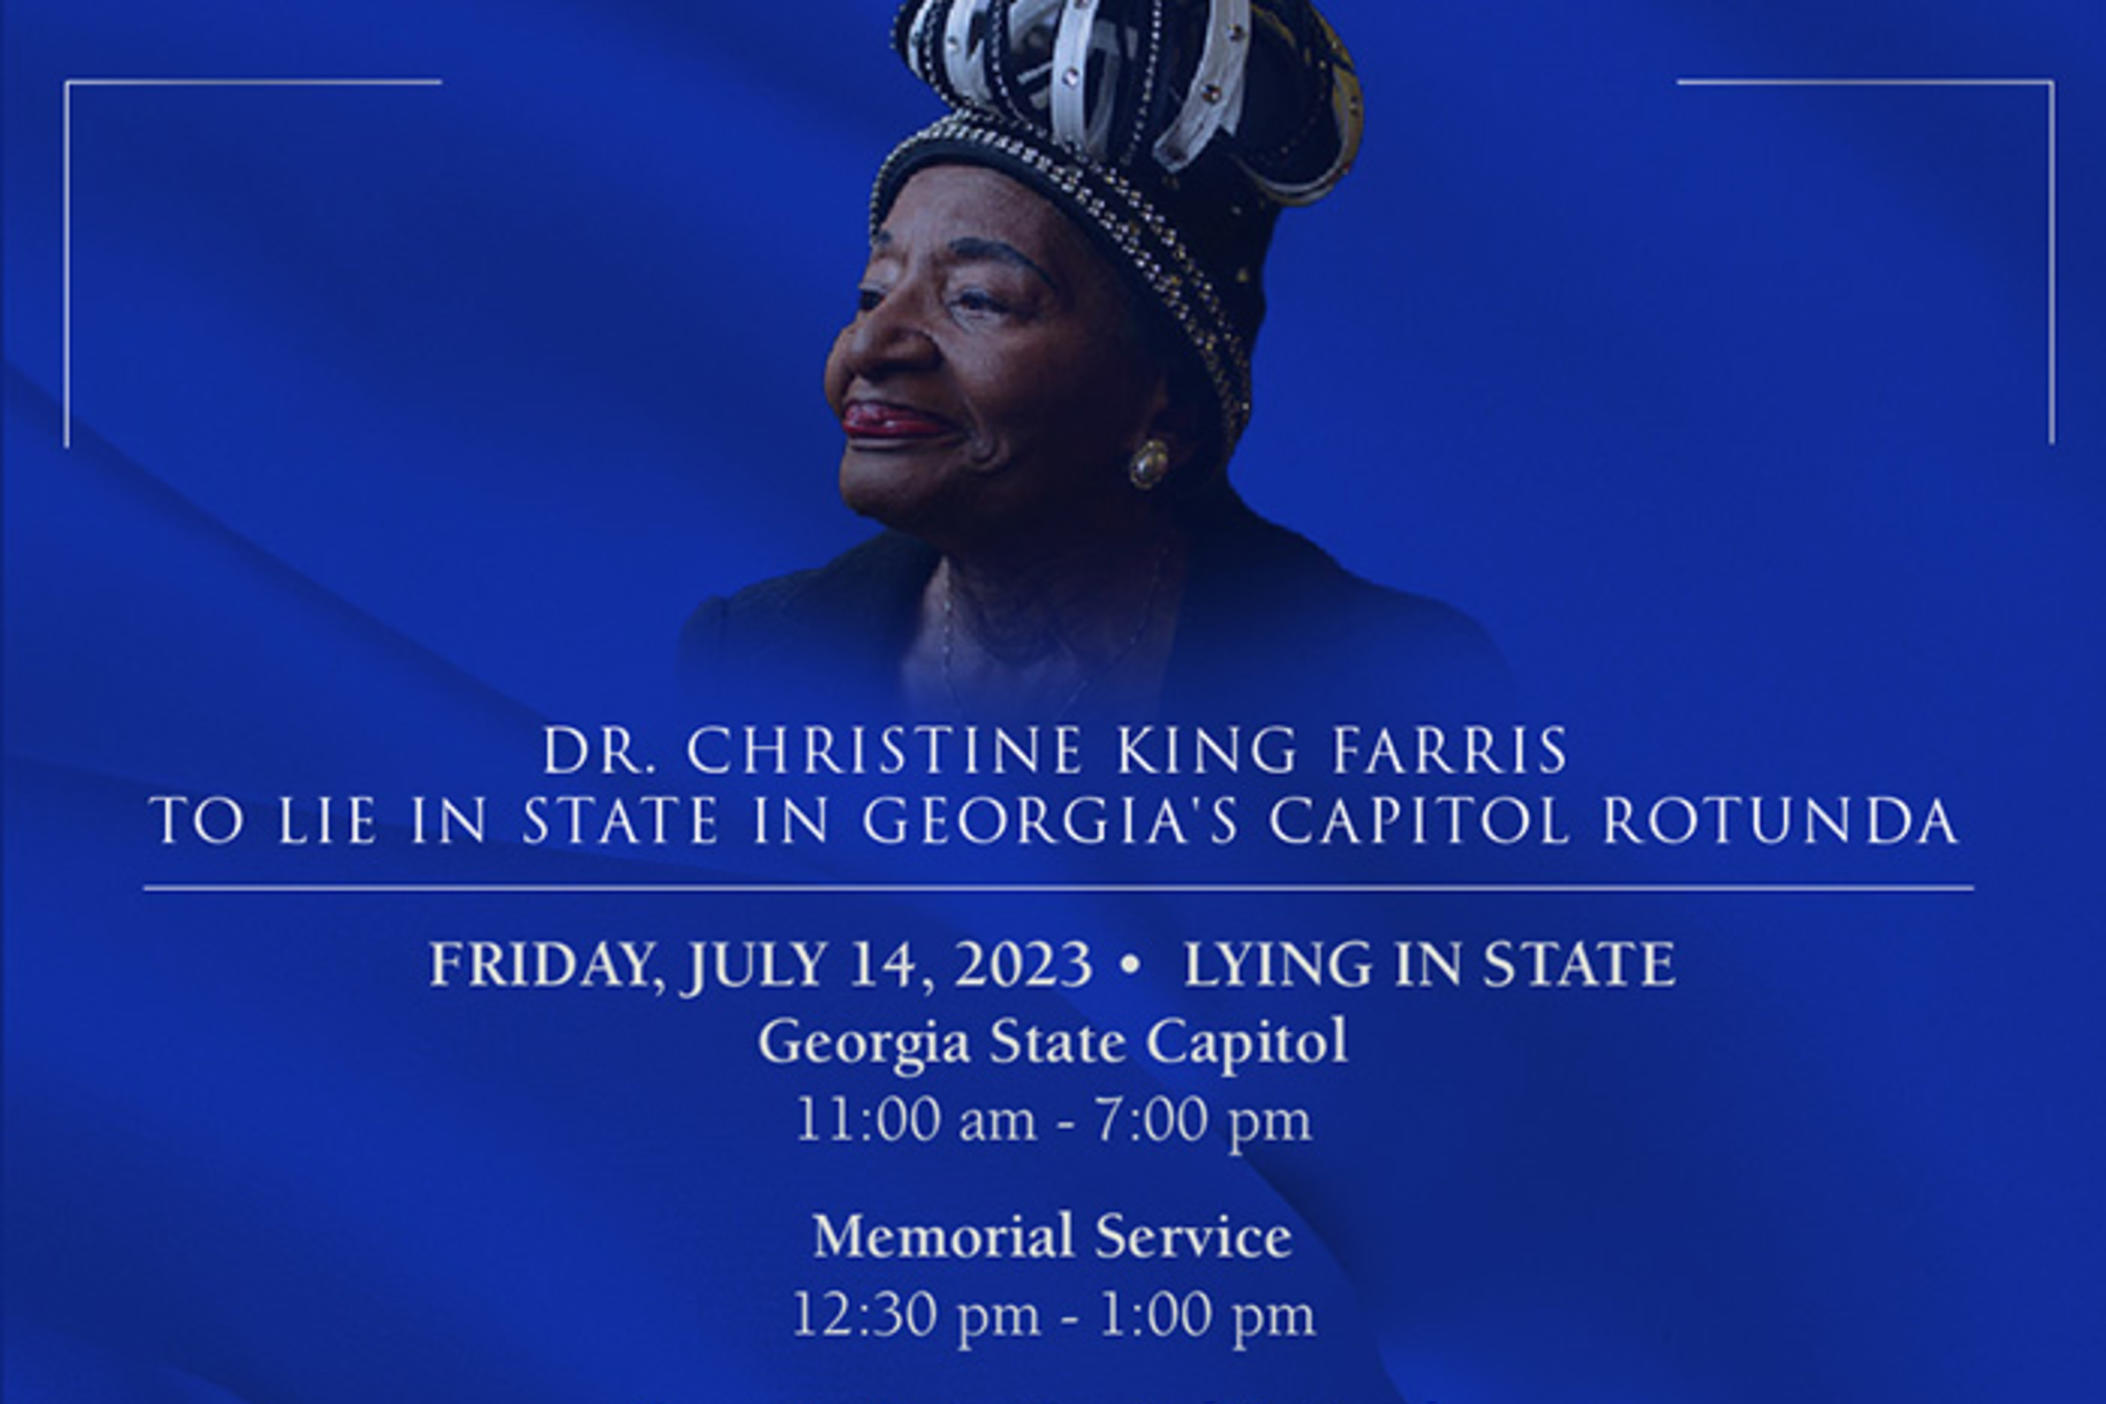 The last sibling of the Rev. Dr. MLK, Jr. to lie in state in GA